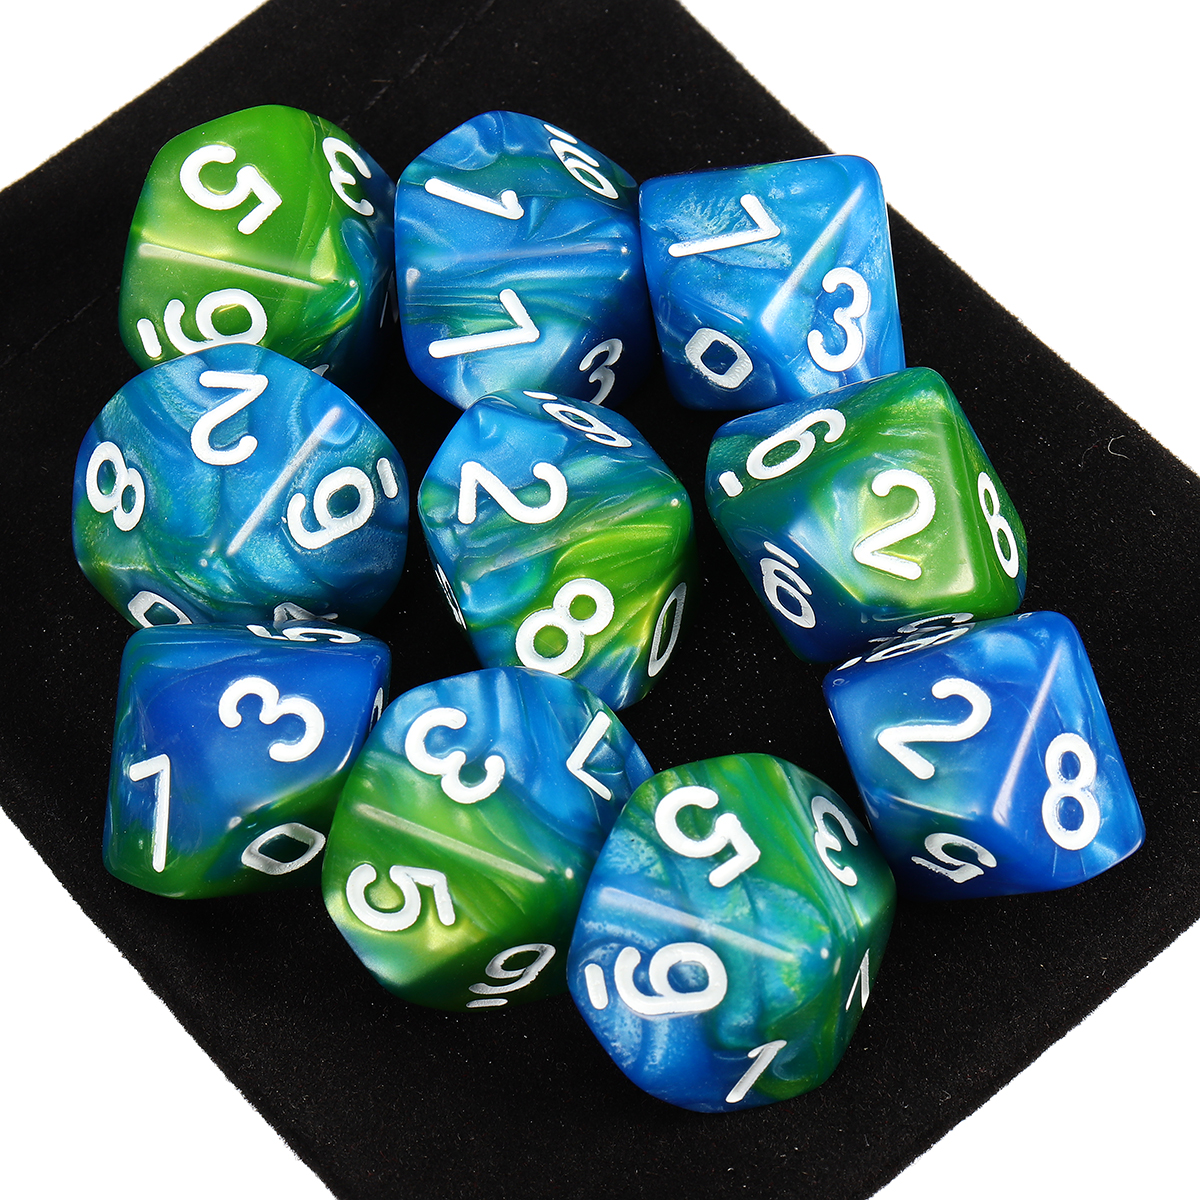 10pcs-10-Sided-Dice-D10-Polyhedral-Dice-RPG-Role-Playing-Game-Dices-w-bag-1351752-10